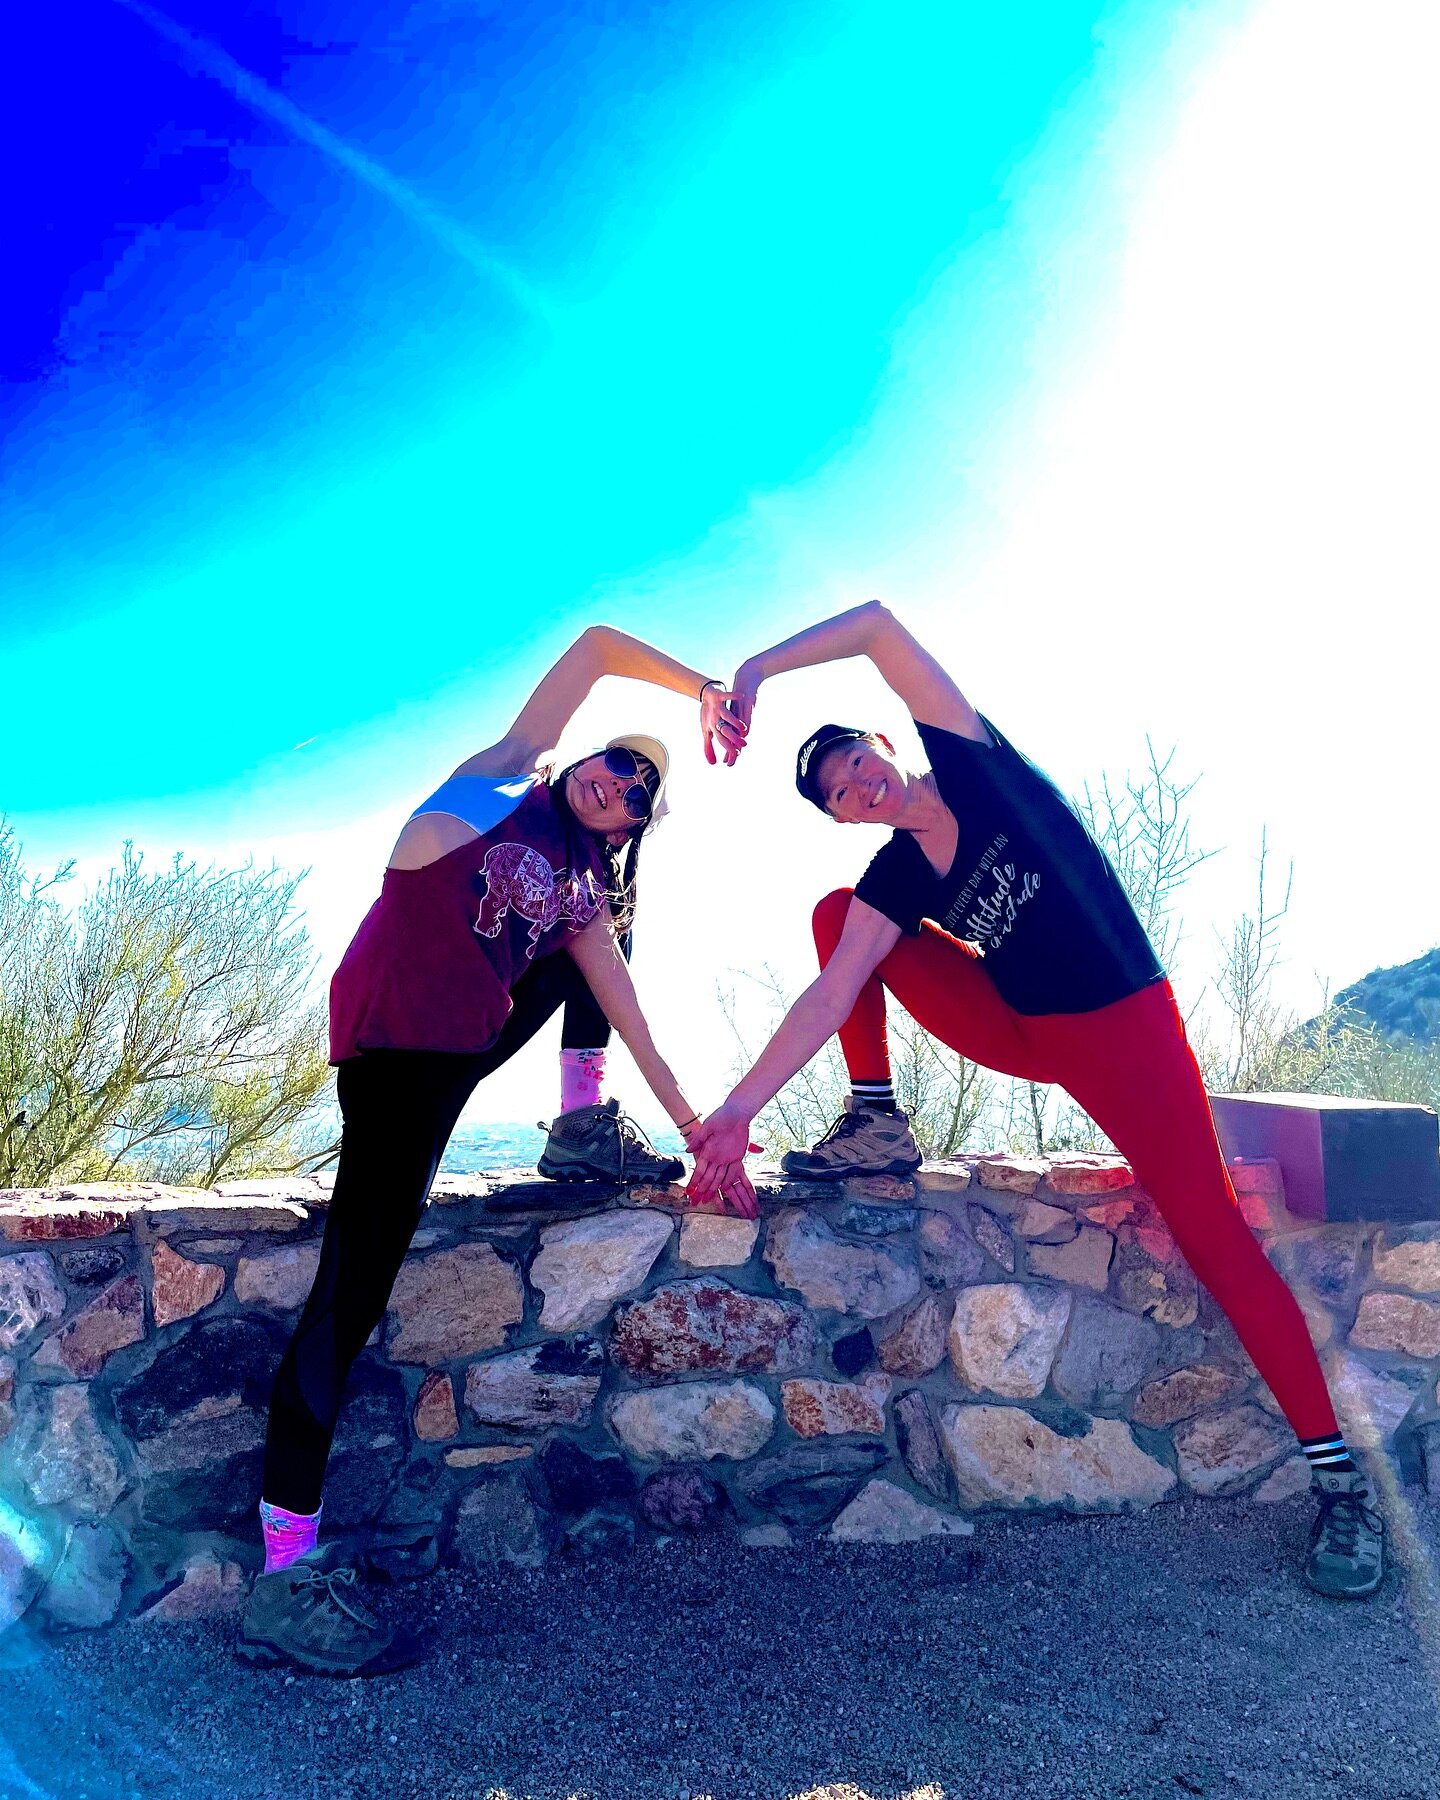 So grateful for amazing friends and the opportunity to enjoy some sunshine and yoga outdoors on our hike!! 

So glad we met over 5 years ago @sherises2020 !!

Todays online chair yoga session was all about love and opening ourselves up to be more for